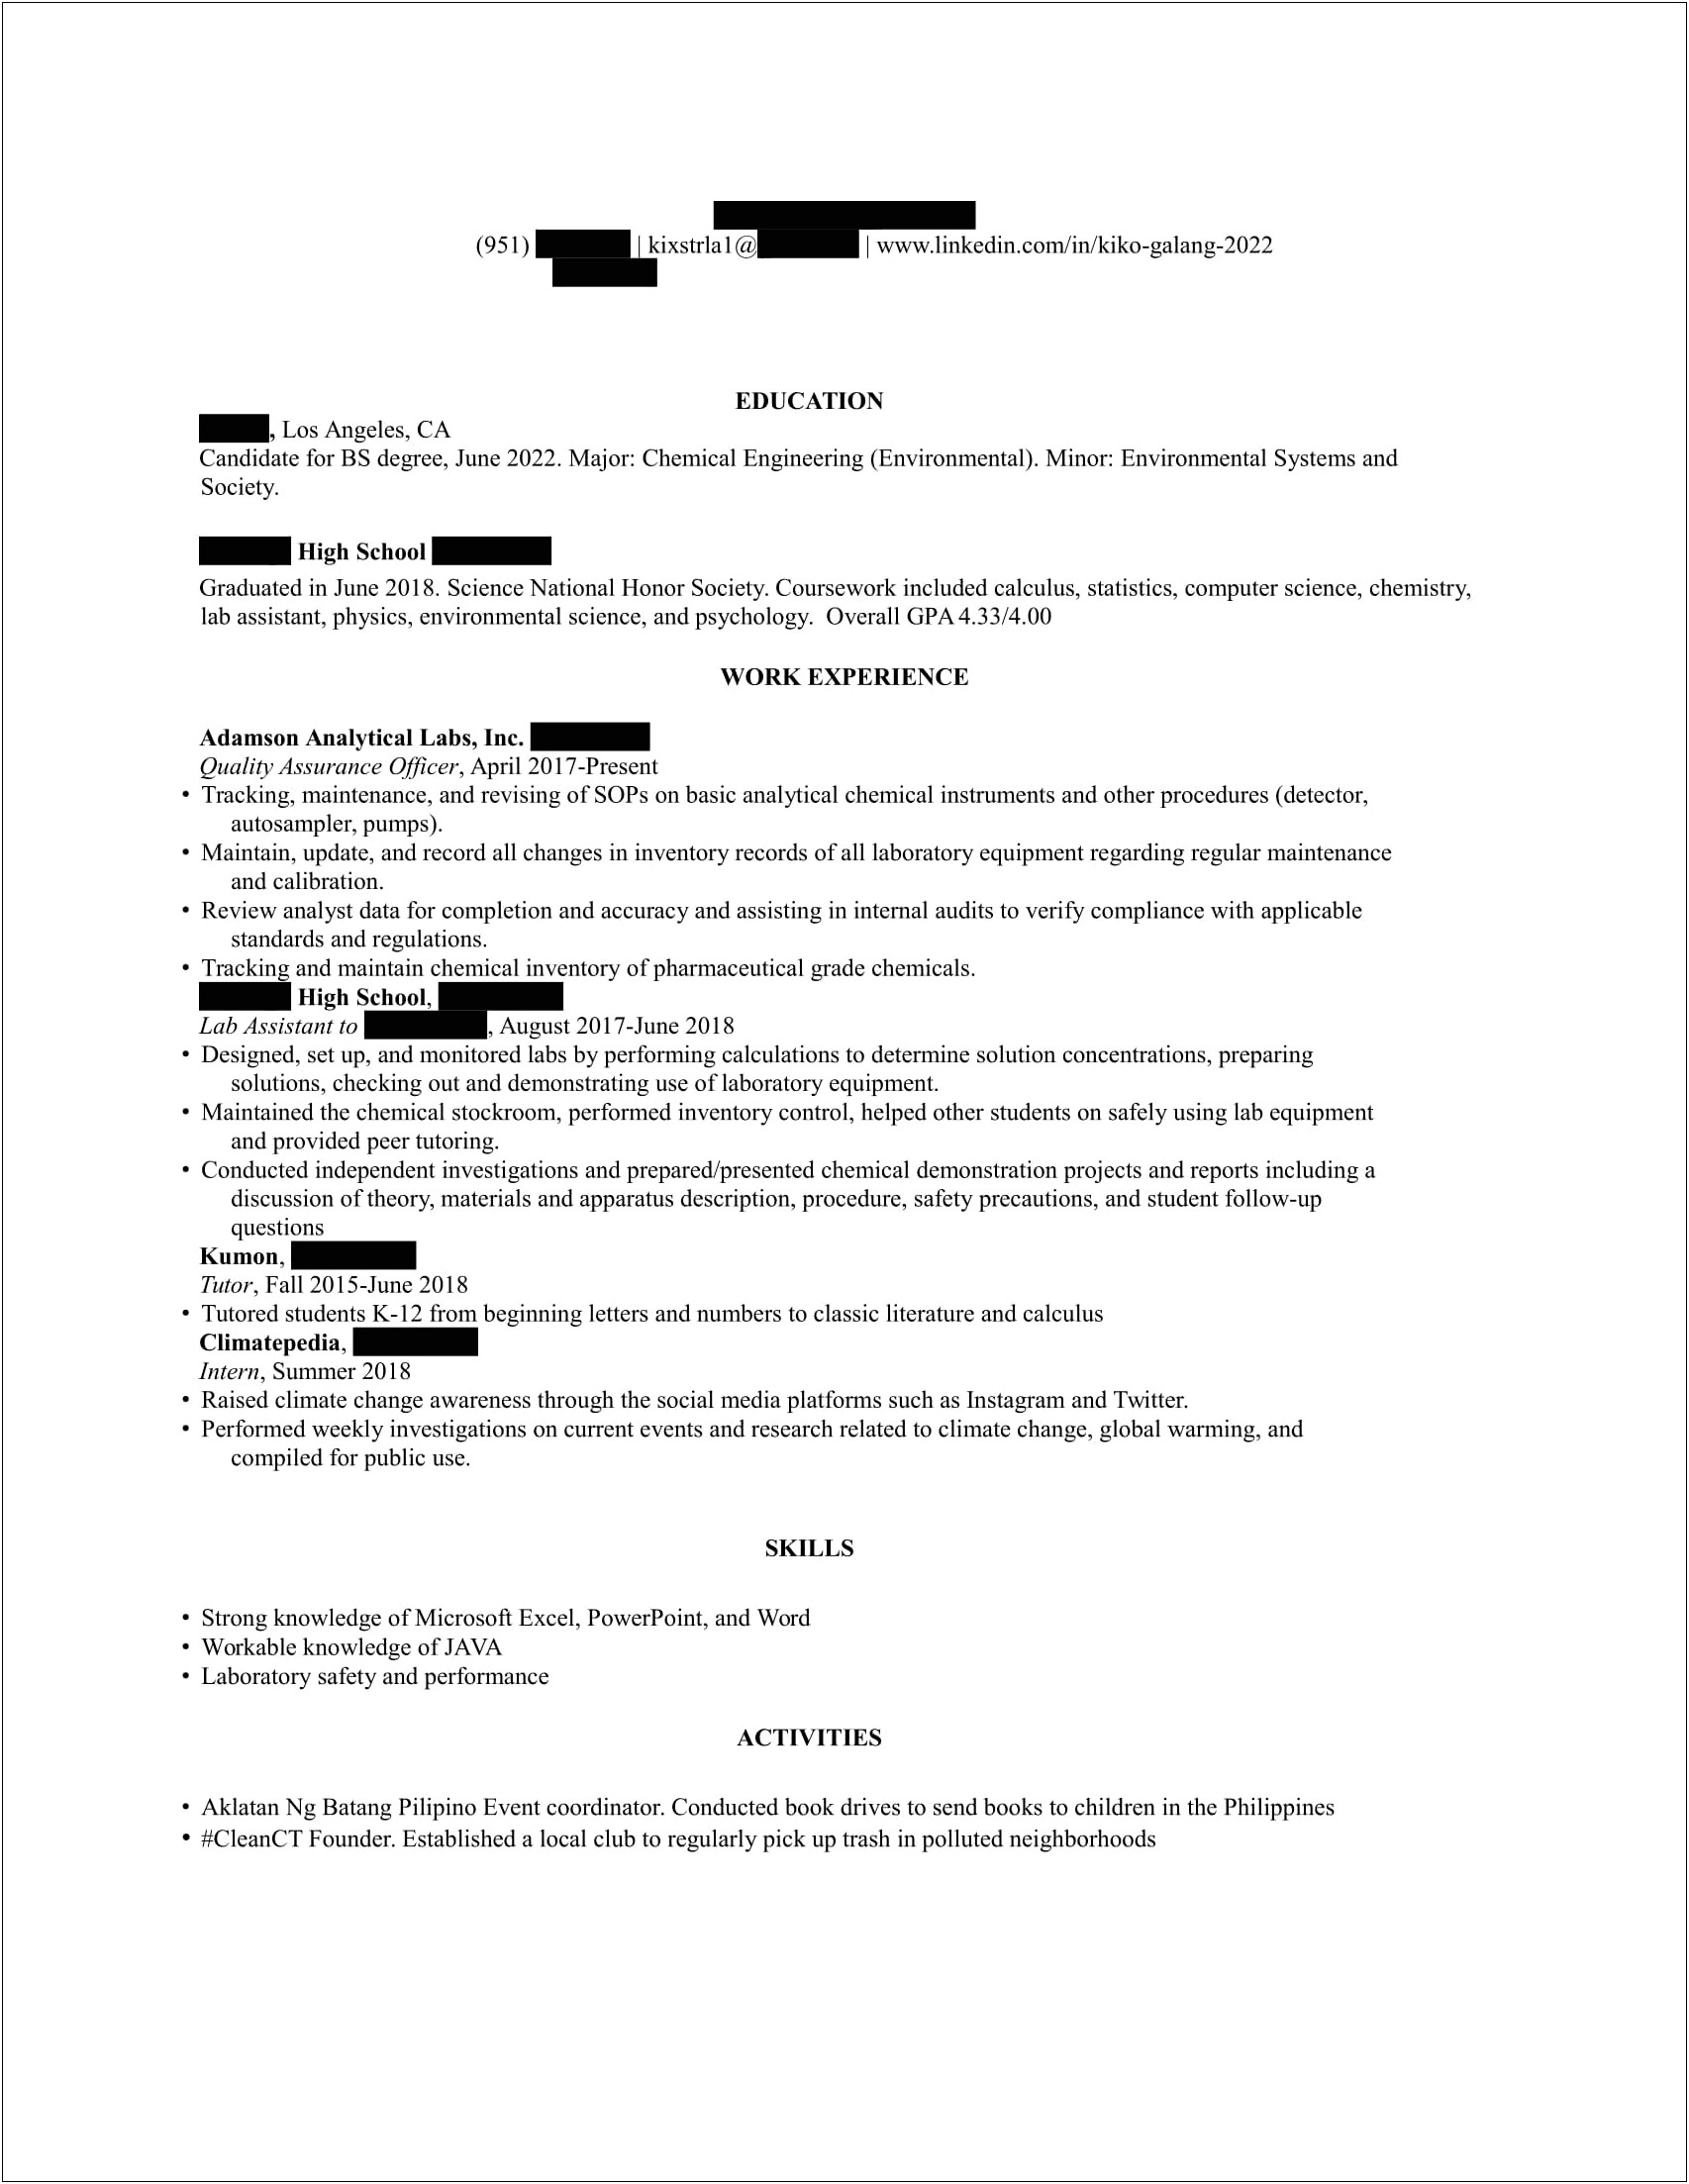 Resume For High School Student Applying For College